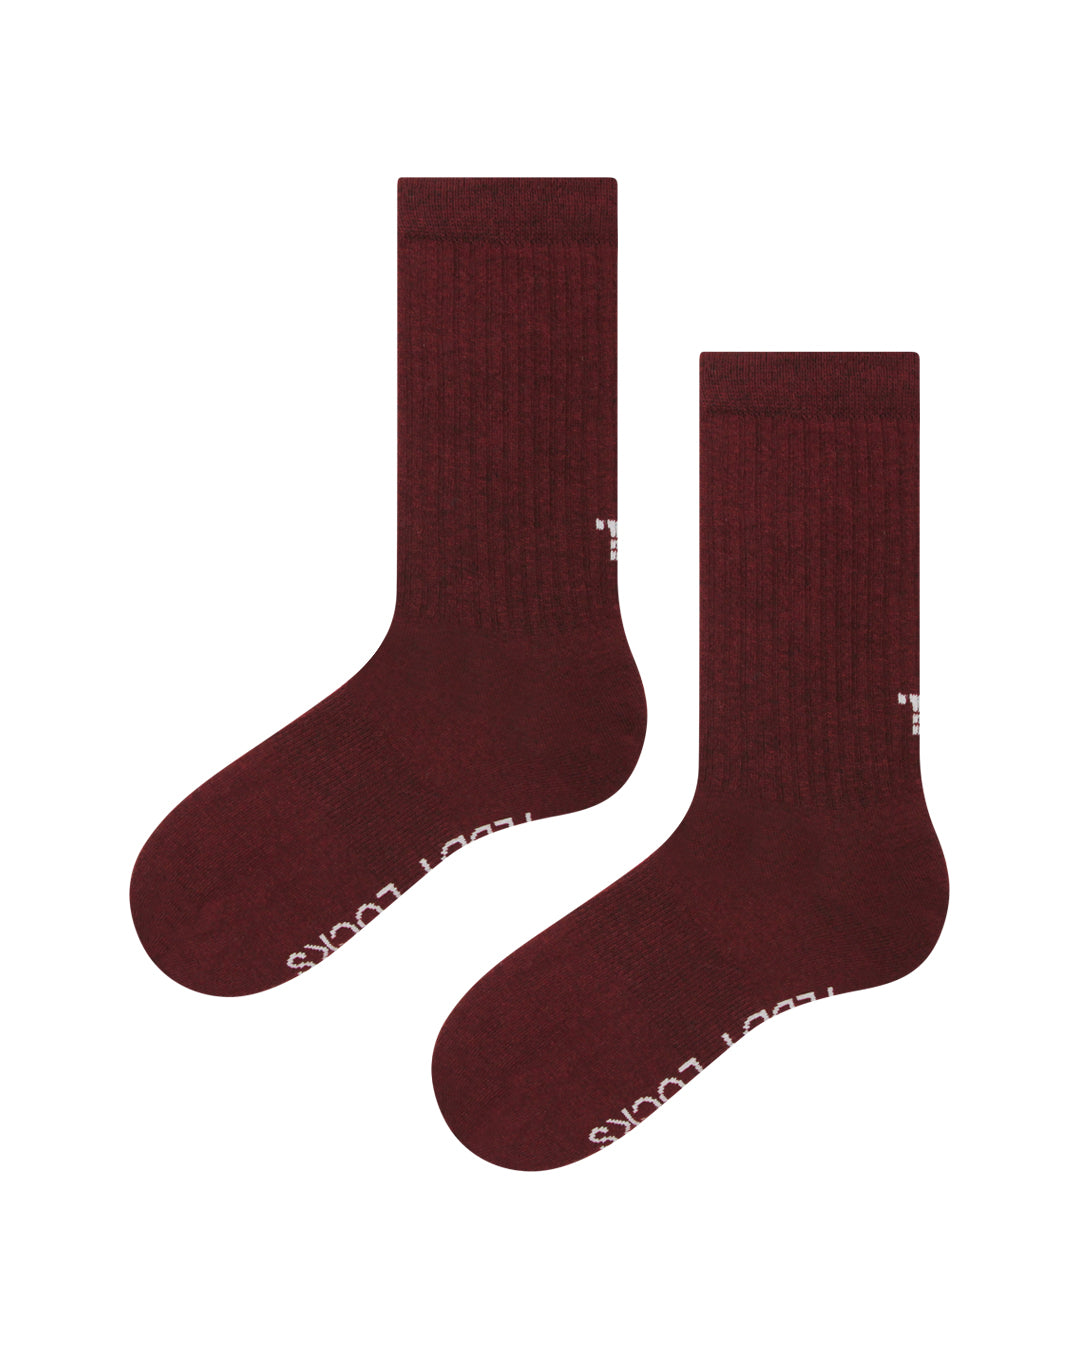 Welly socks with arch support and seamless toes